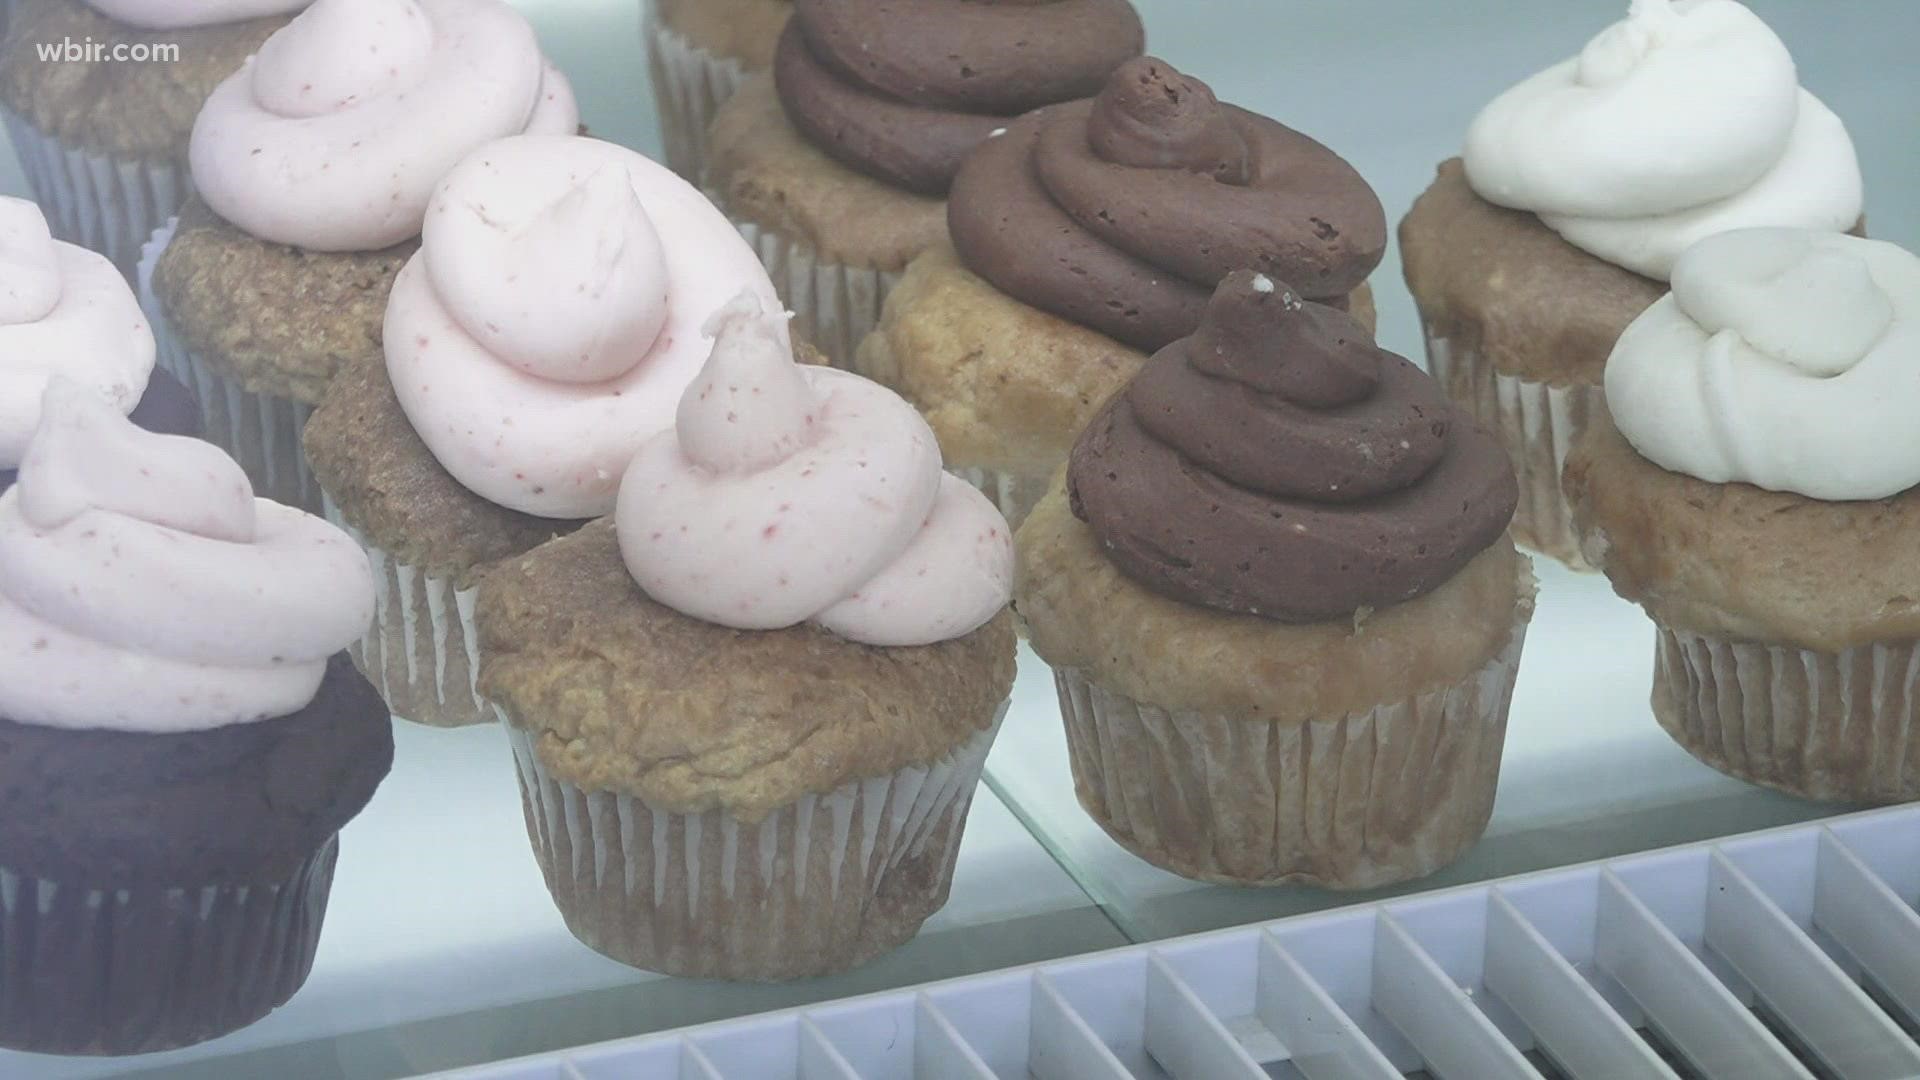 Free Reign Bakery now has three locations across Knoxville, serving a full menu to people with food sensitivities and allergies.